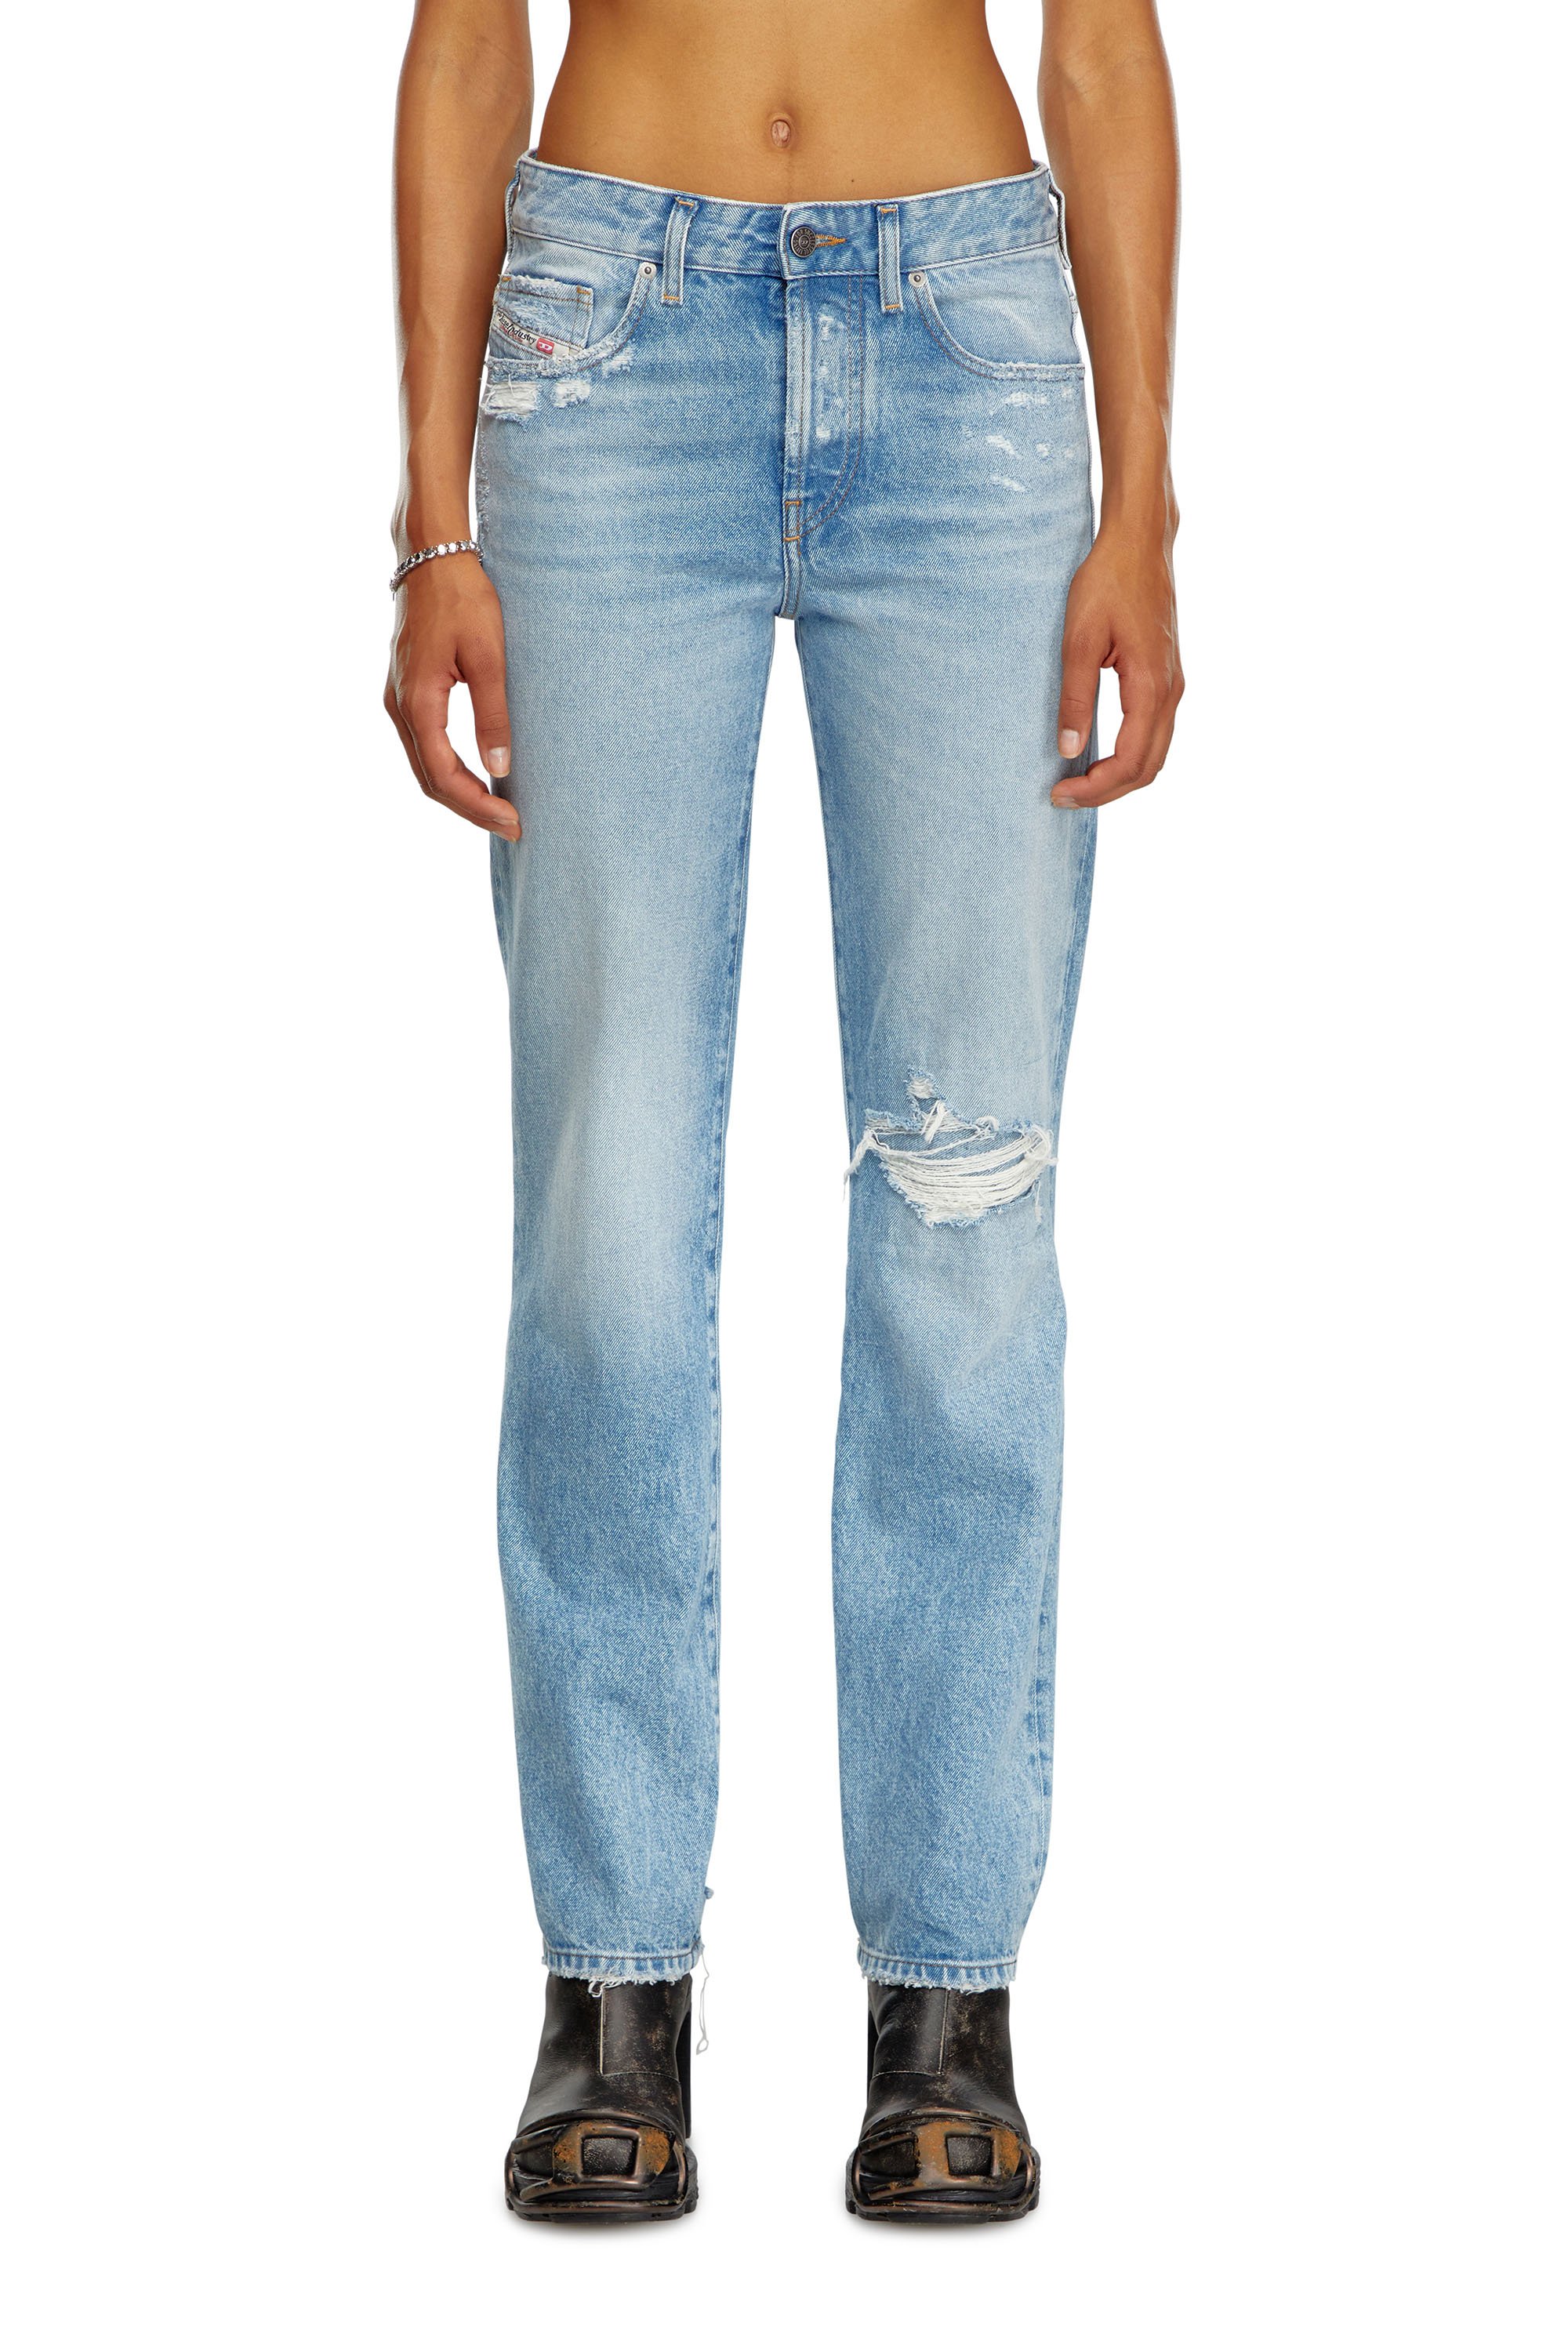 Diesel - Straight Jeans 1989 D-Mine 09J80, Mujer Straight Jeans - 1989 D-Mine in Azul marino - Image 2